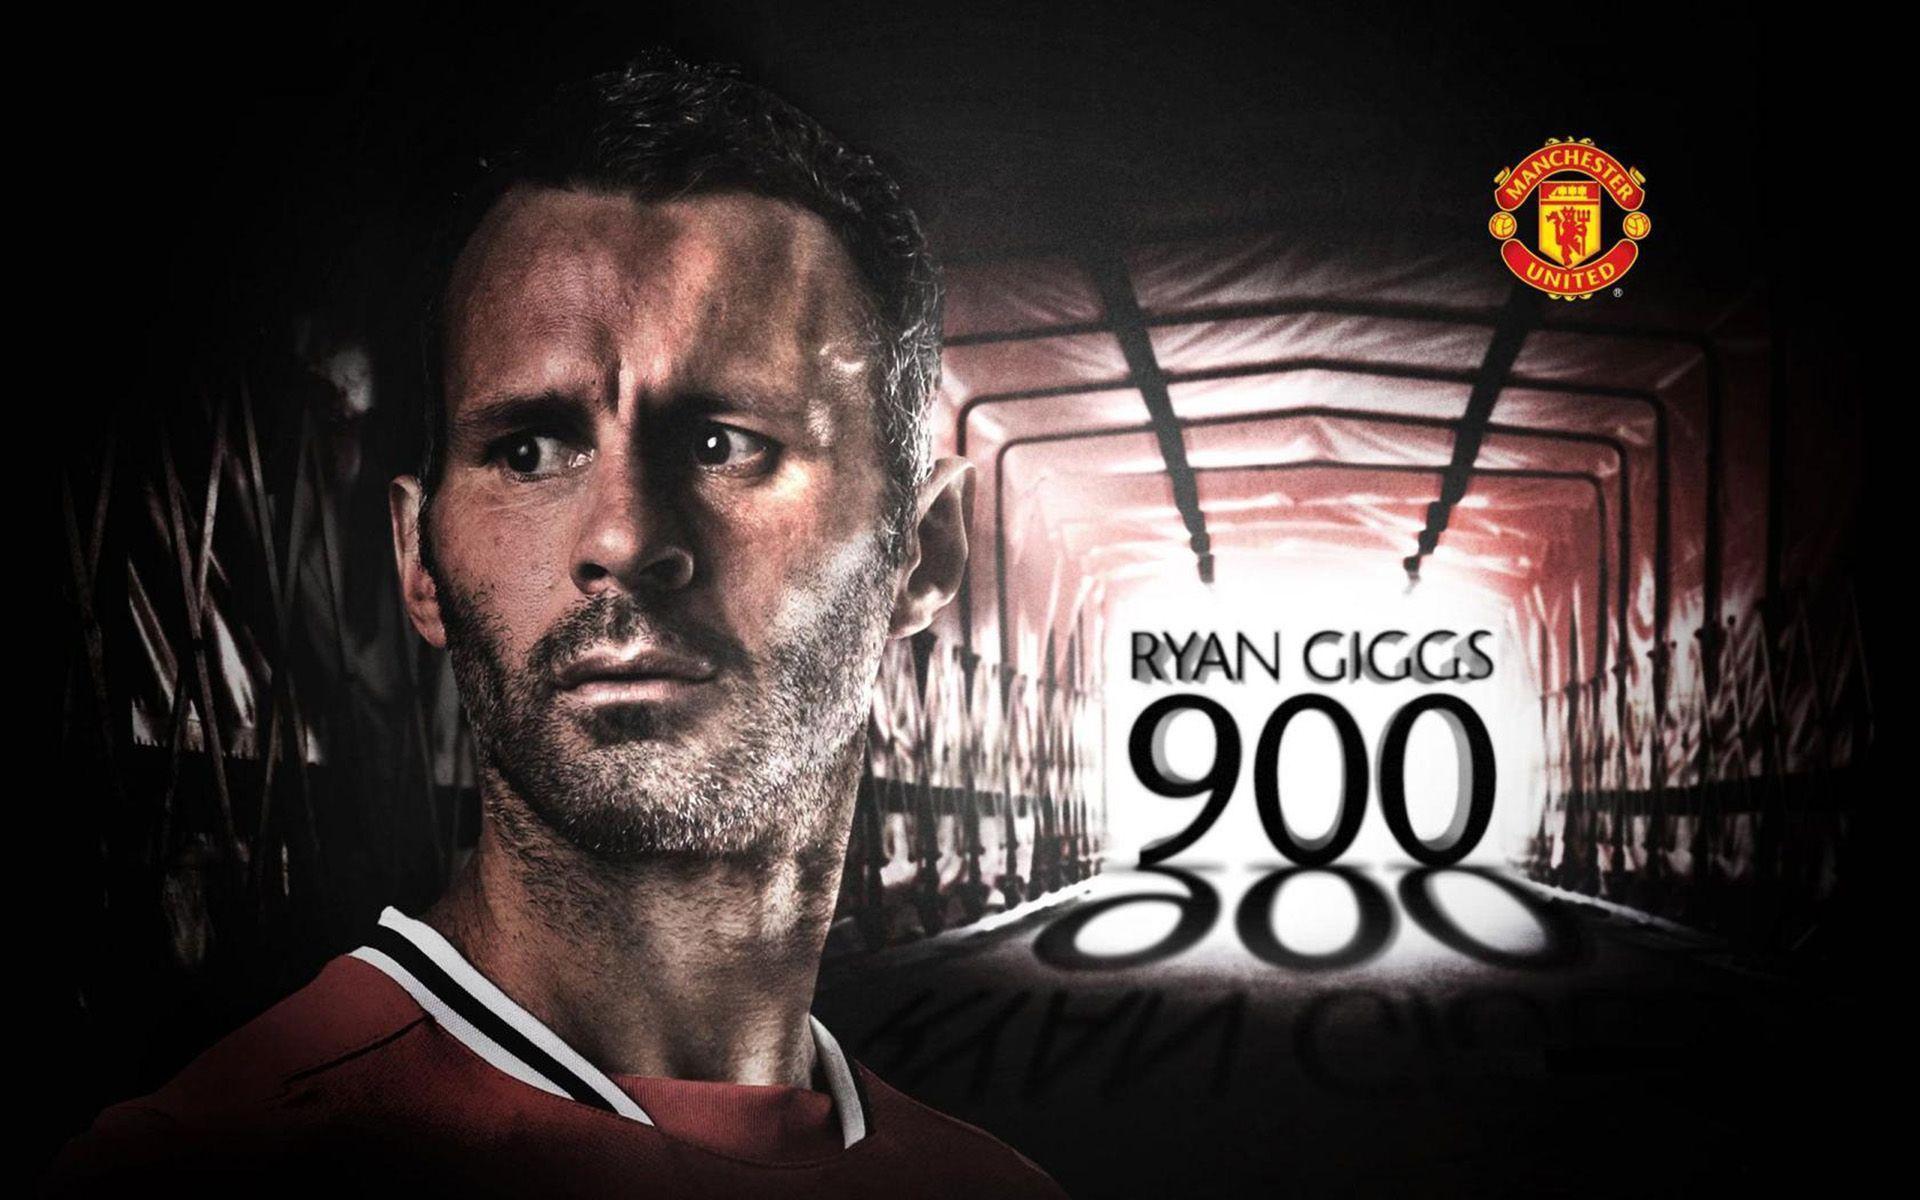 Ryan Giggs, Manchaster United widescreen wallpaper. Wide